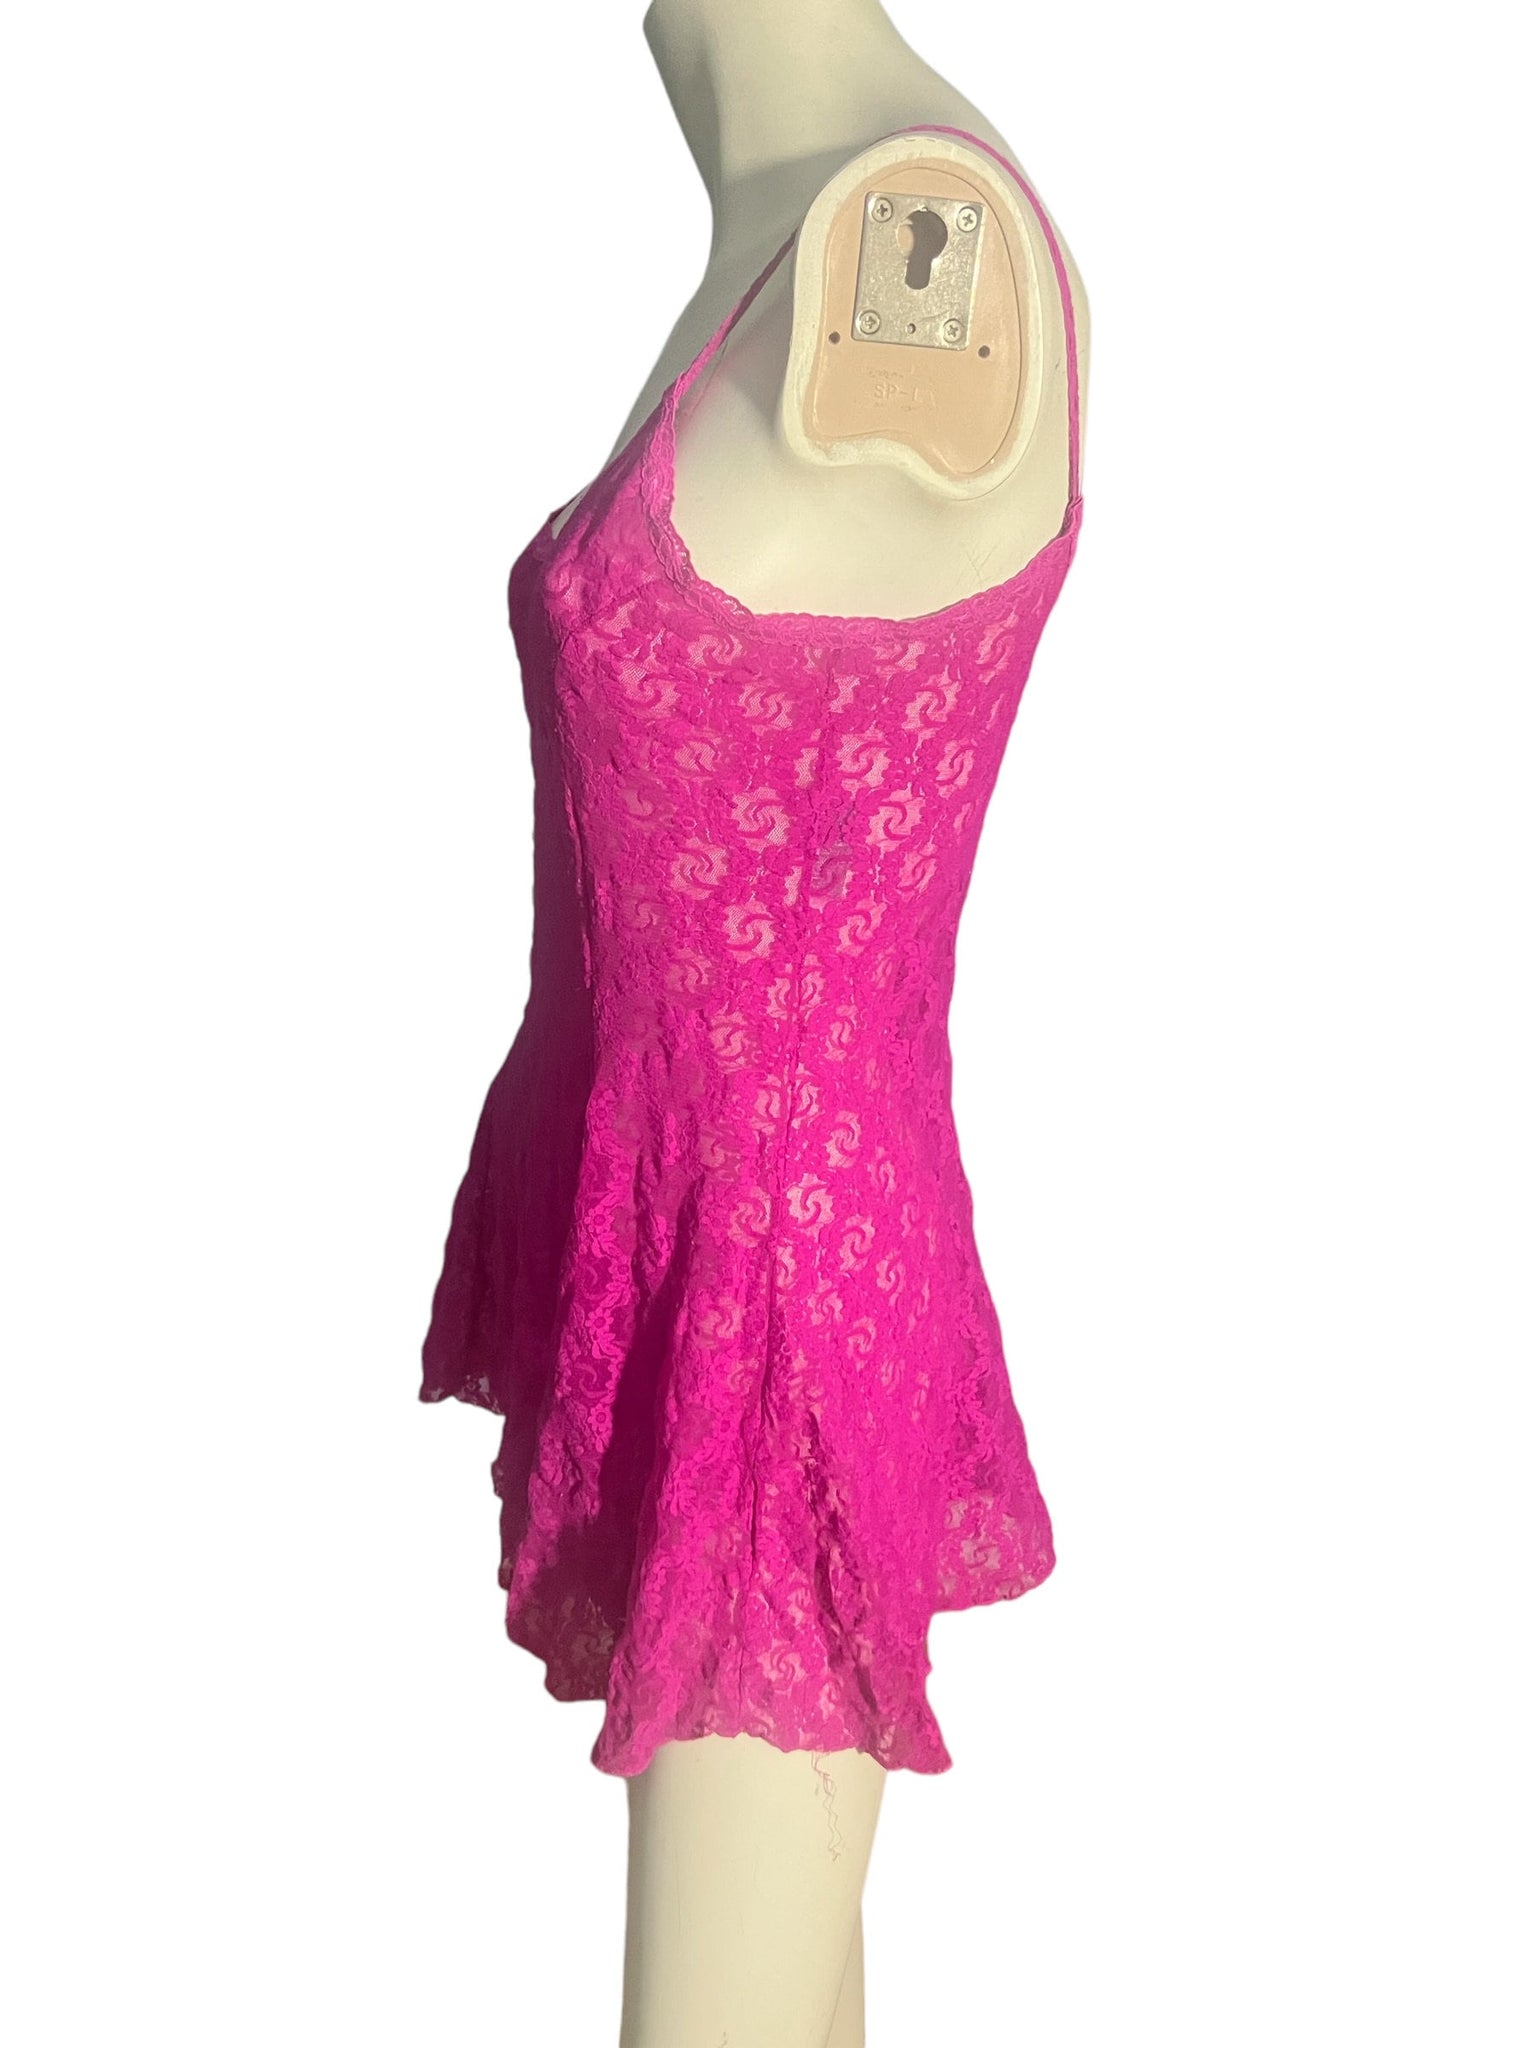 Vintage 80's pink sheer lace nightie S Val Mode